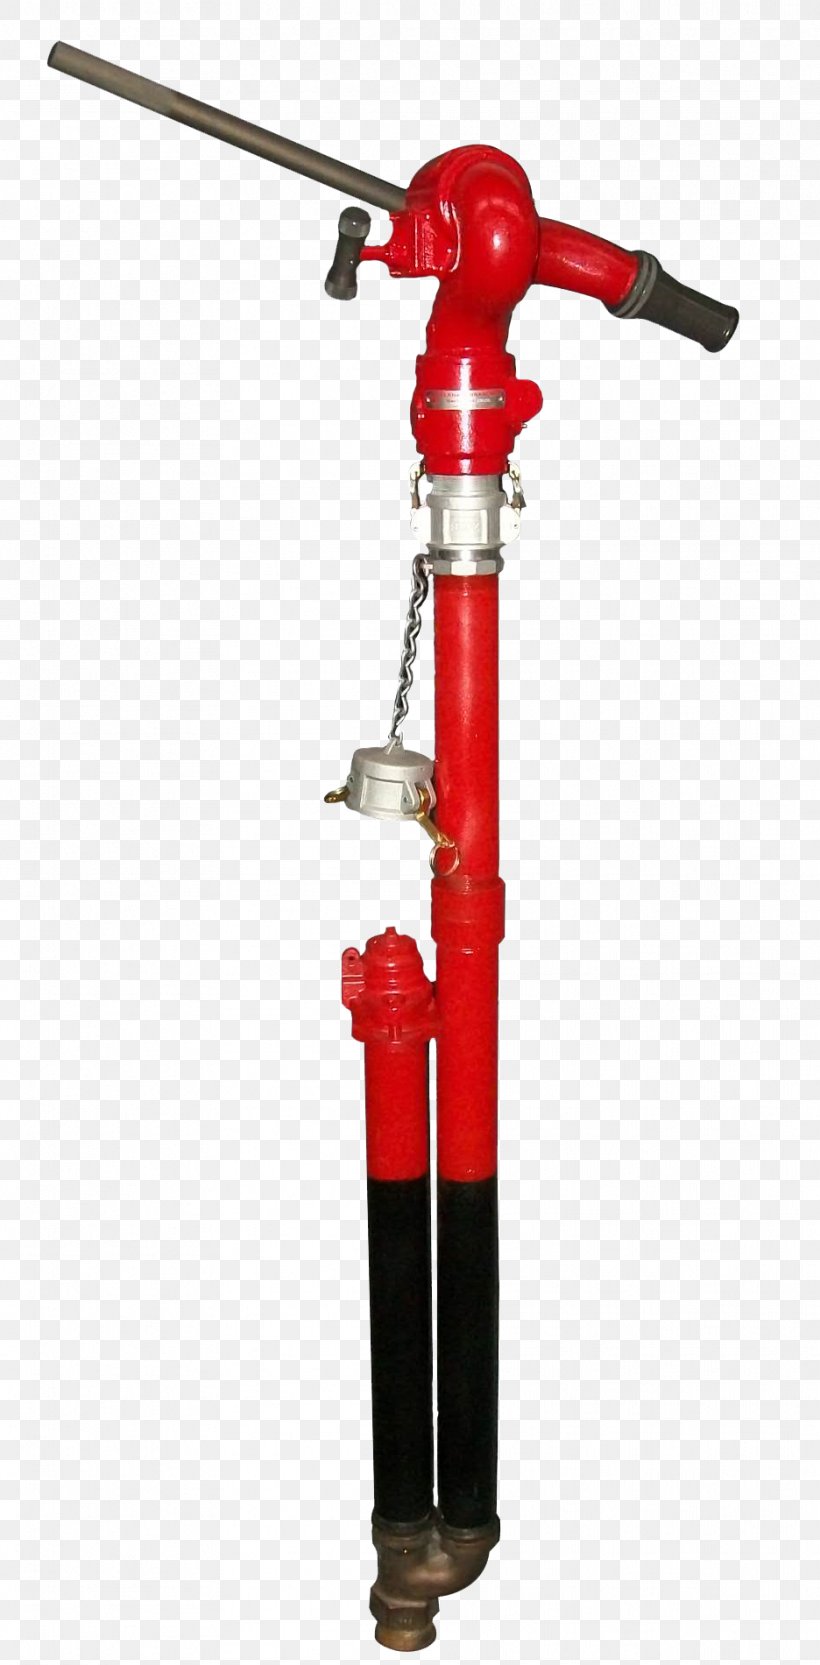 Fire Hydrant Flushing Hydrant Water, PNG, 936x1901px, Fire Hydrant, Fire, Flushing Hydrant, Hardware, Hydrant Download Free